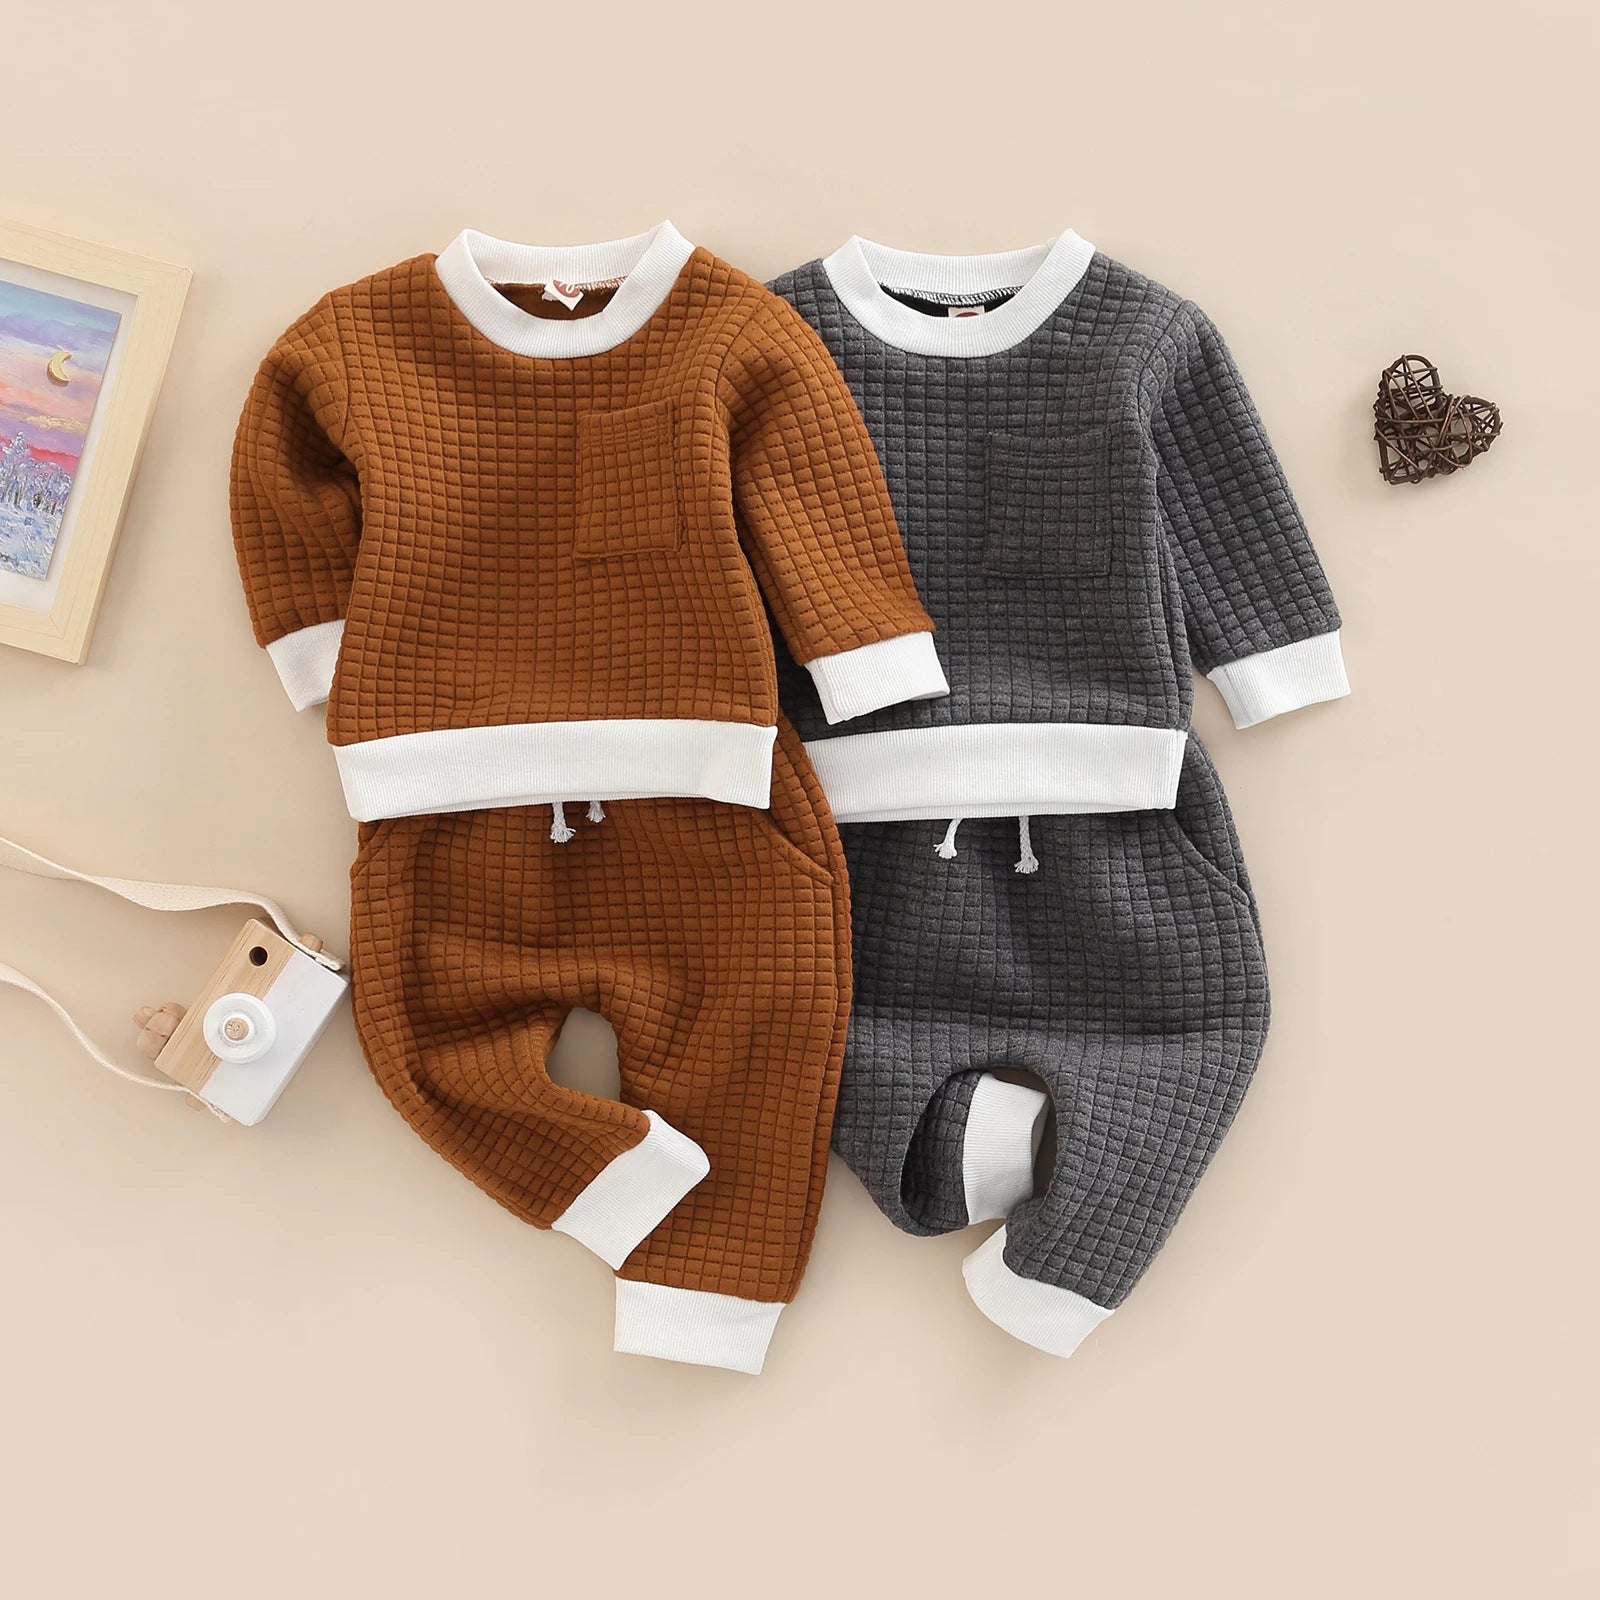 Baby 2 piece set Baby Outfit Unisex Boys or Girls Plaid Long Sleeve Round Neck Tops Ms. Leah's Place